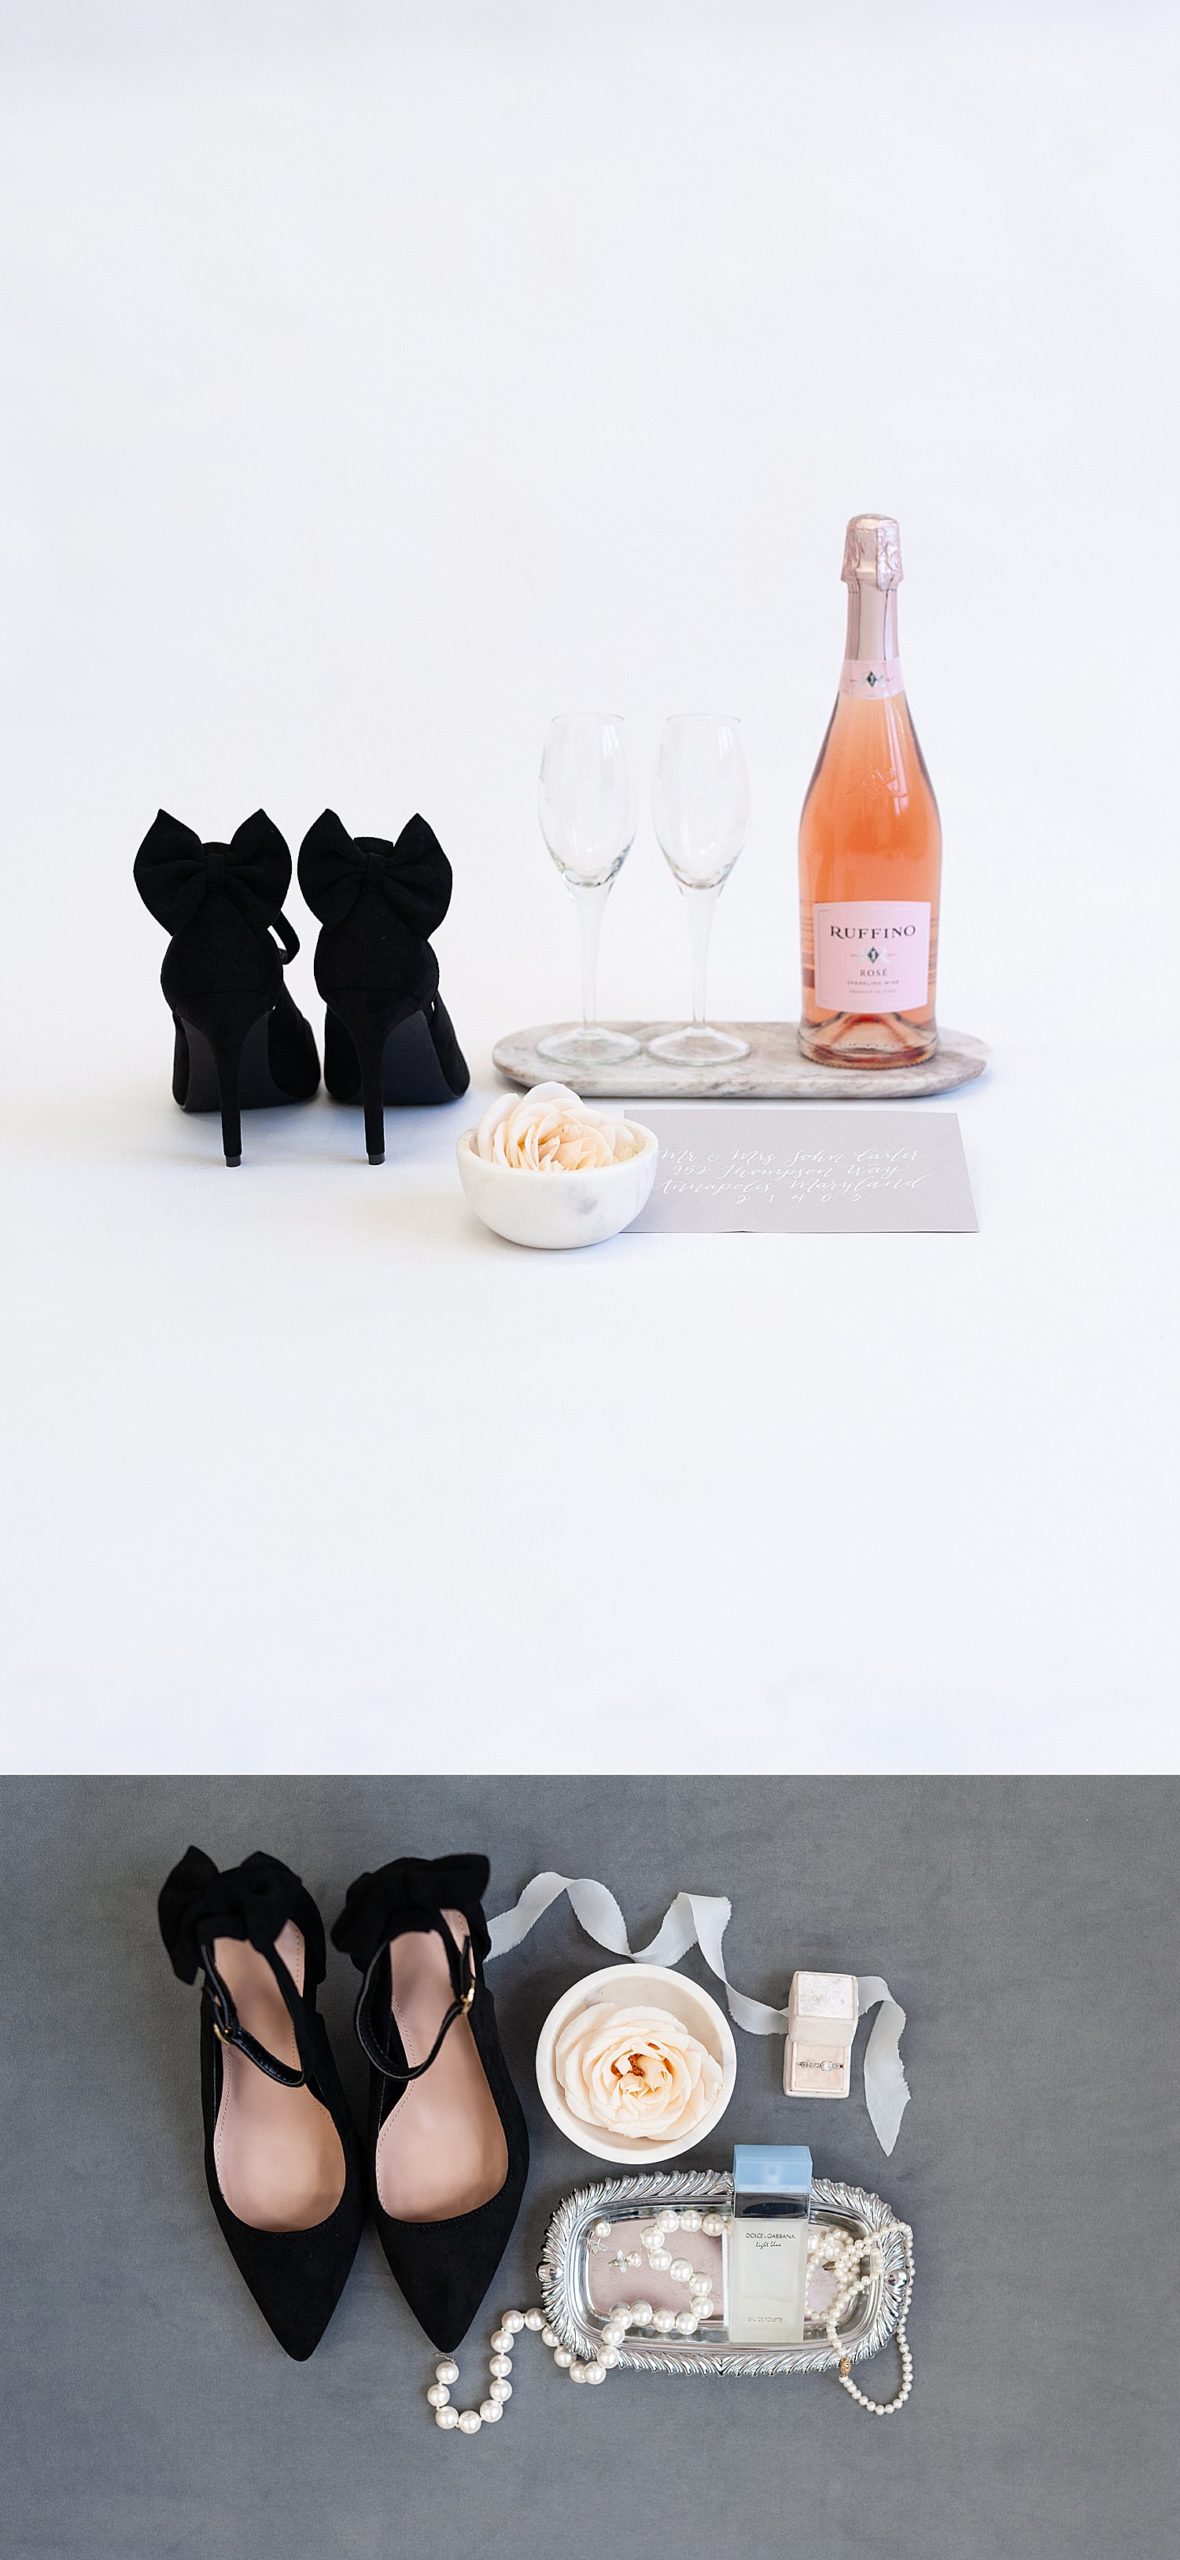 styled brand shoot / styled stock photography / wedding planner flat lay / editorial / classic / black and white